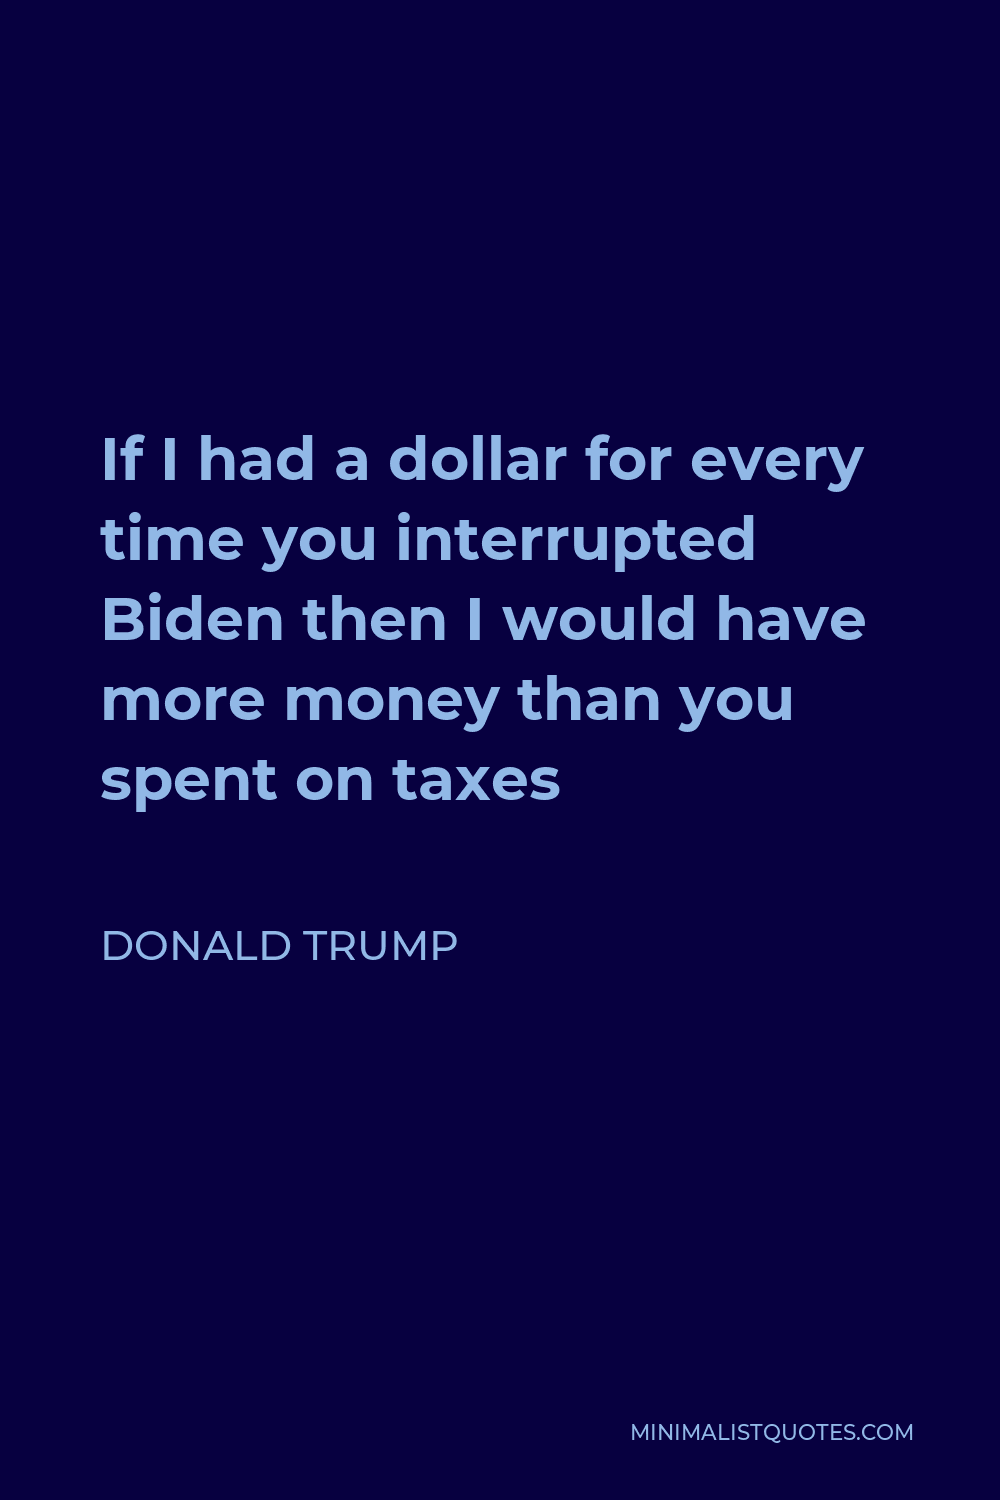 Donald Trump Quote - If I had a dollar for every time you interrupted Biden then I would have more money than you spent on taxes